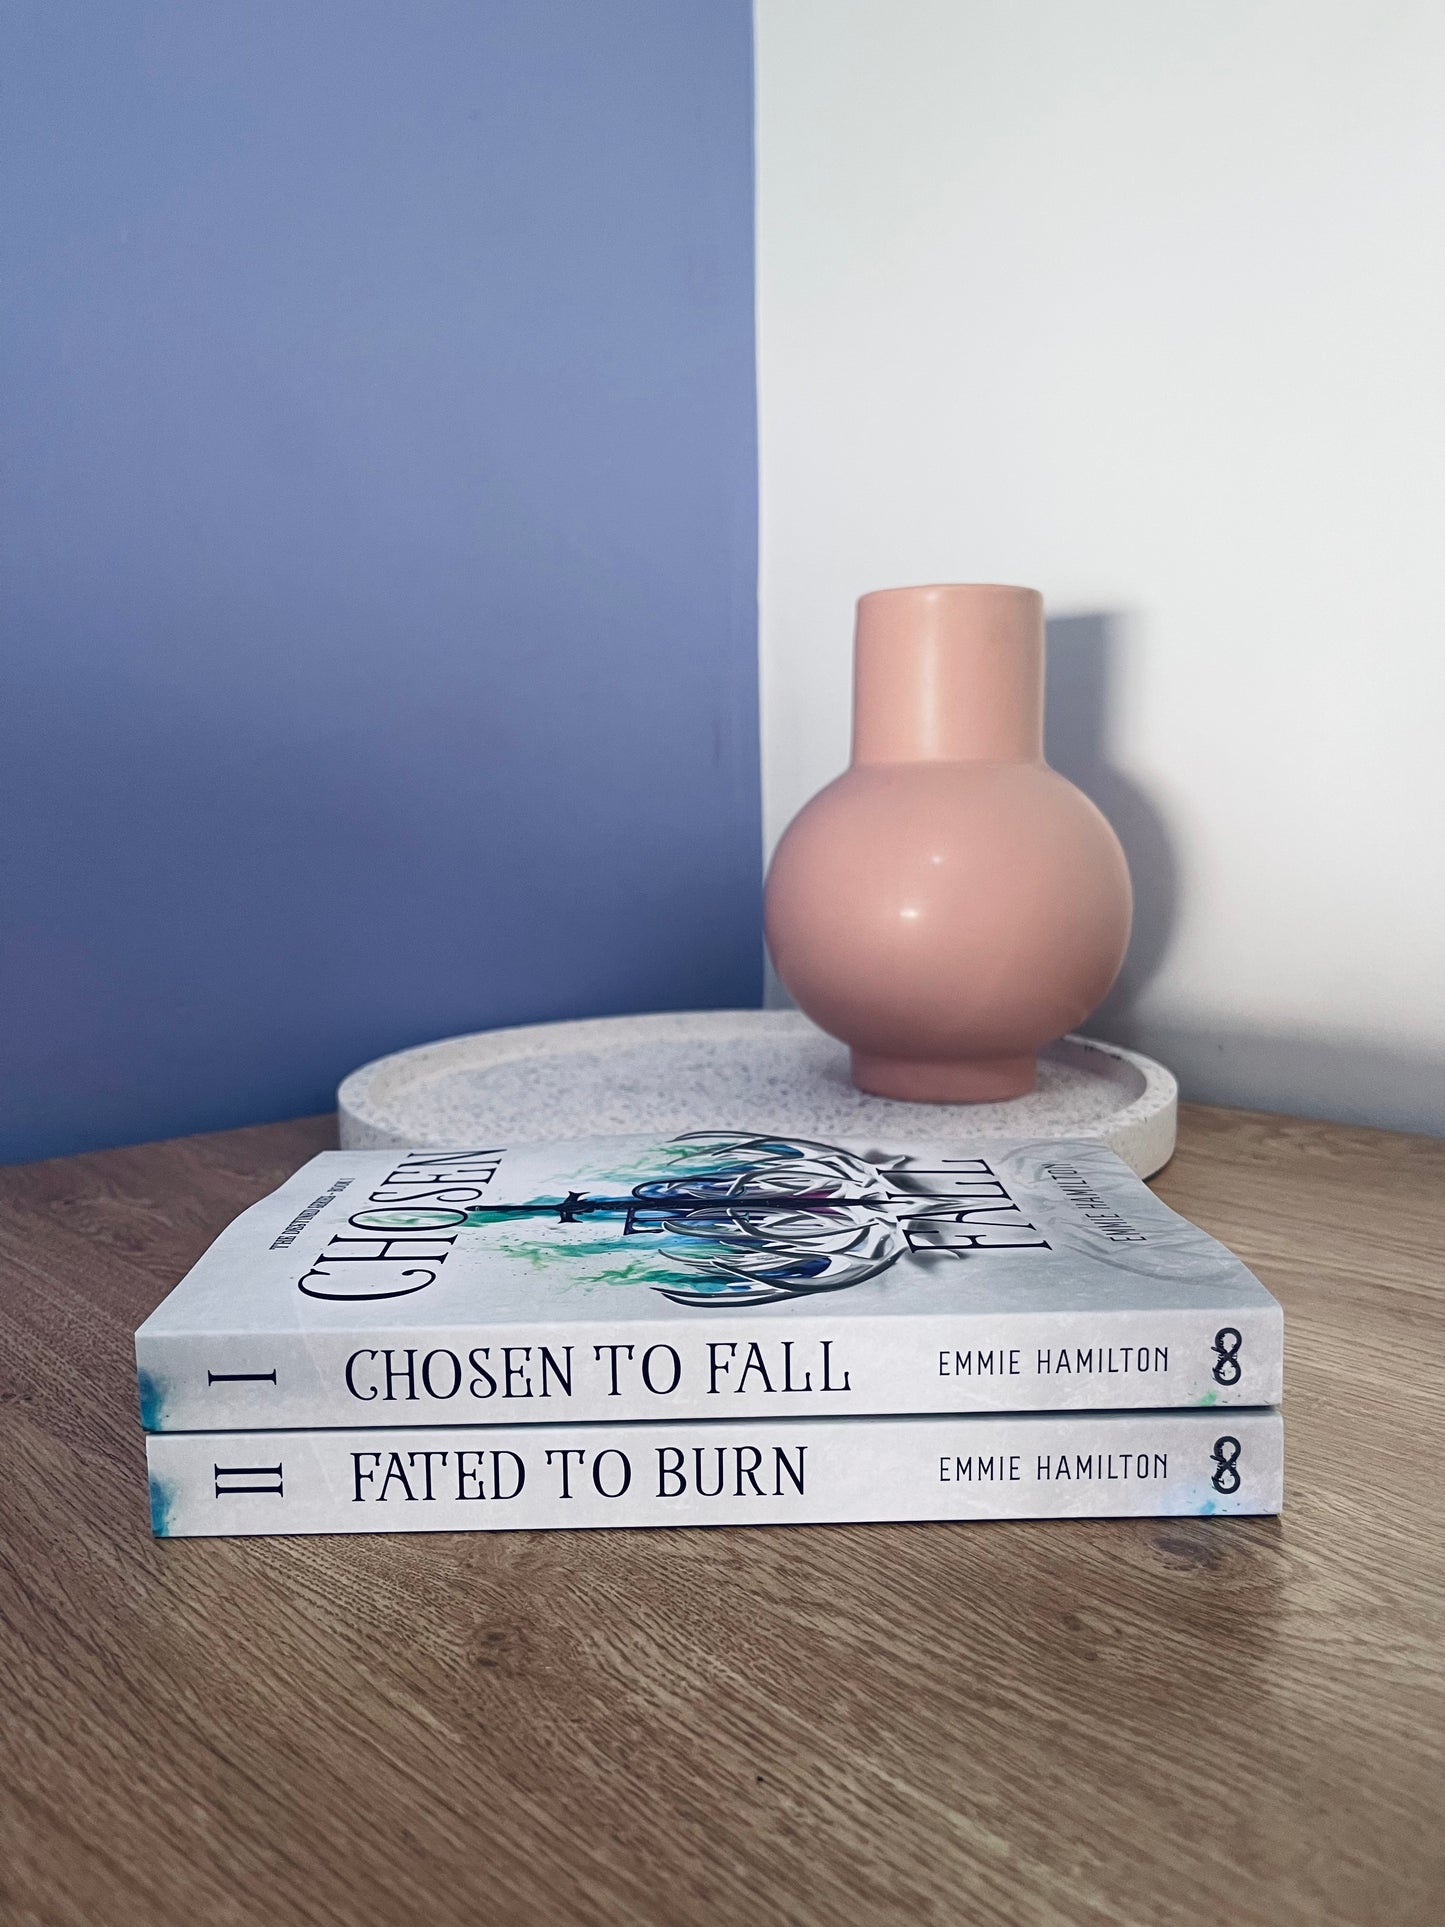 Chosen to Fall by Emmie Hamilton (The Destined Series Book 1)